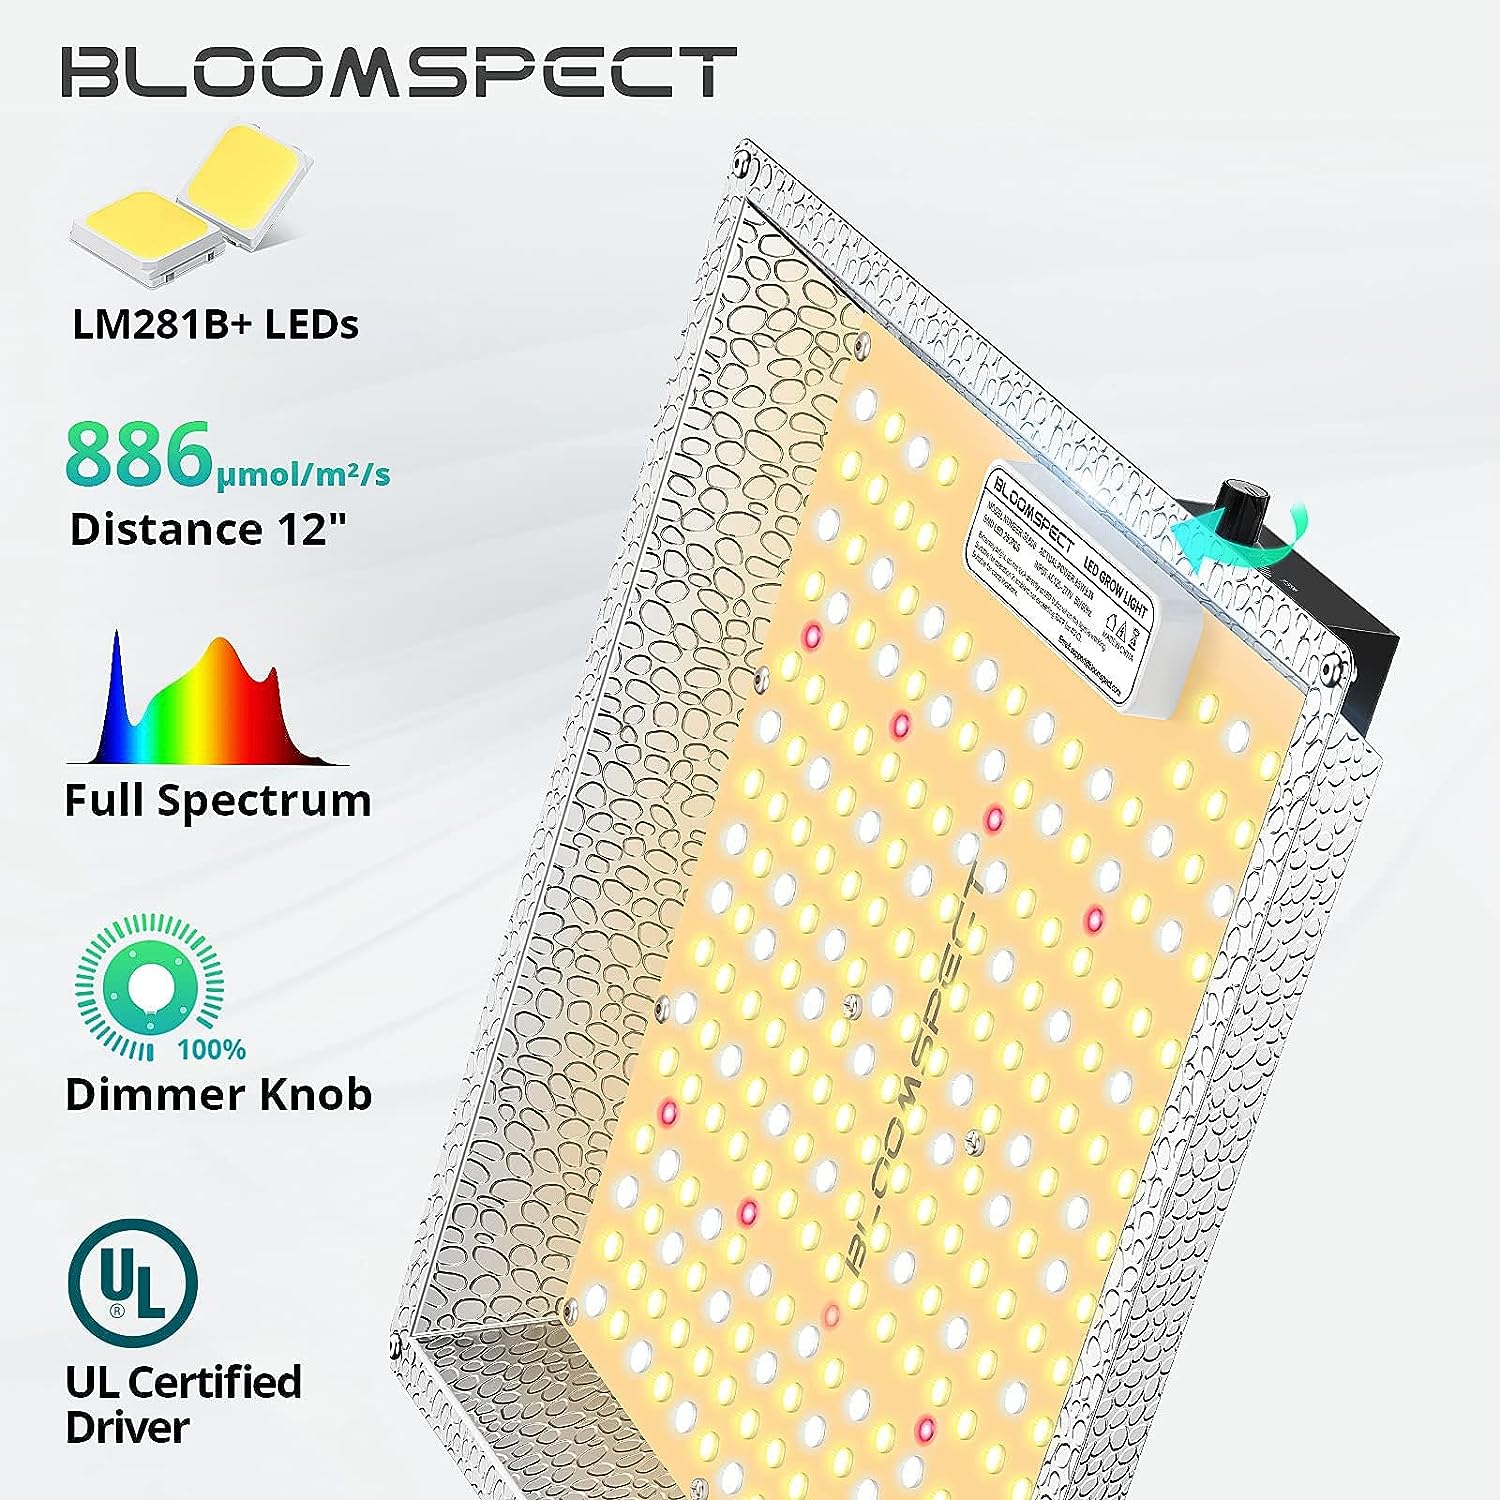 BLOOMSPECT SL600 LED Grow Light, Dimmable Full Spectrum Commercial Growing Lights with Reflector Hood 2x2ft Flower Coverage for Indoor Plants Seeding Veg  Bloom, 250pcs LEDs